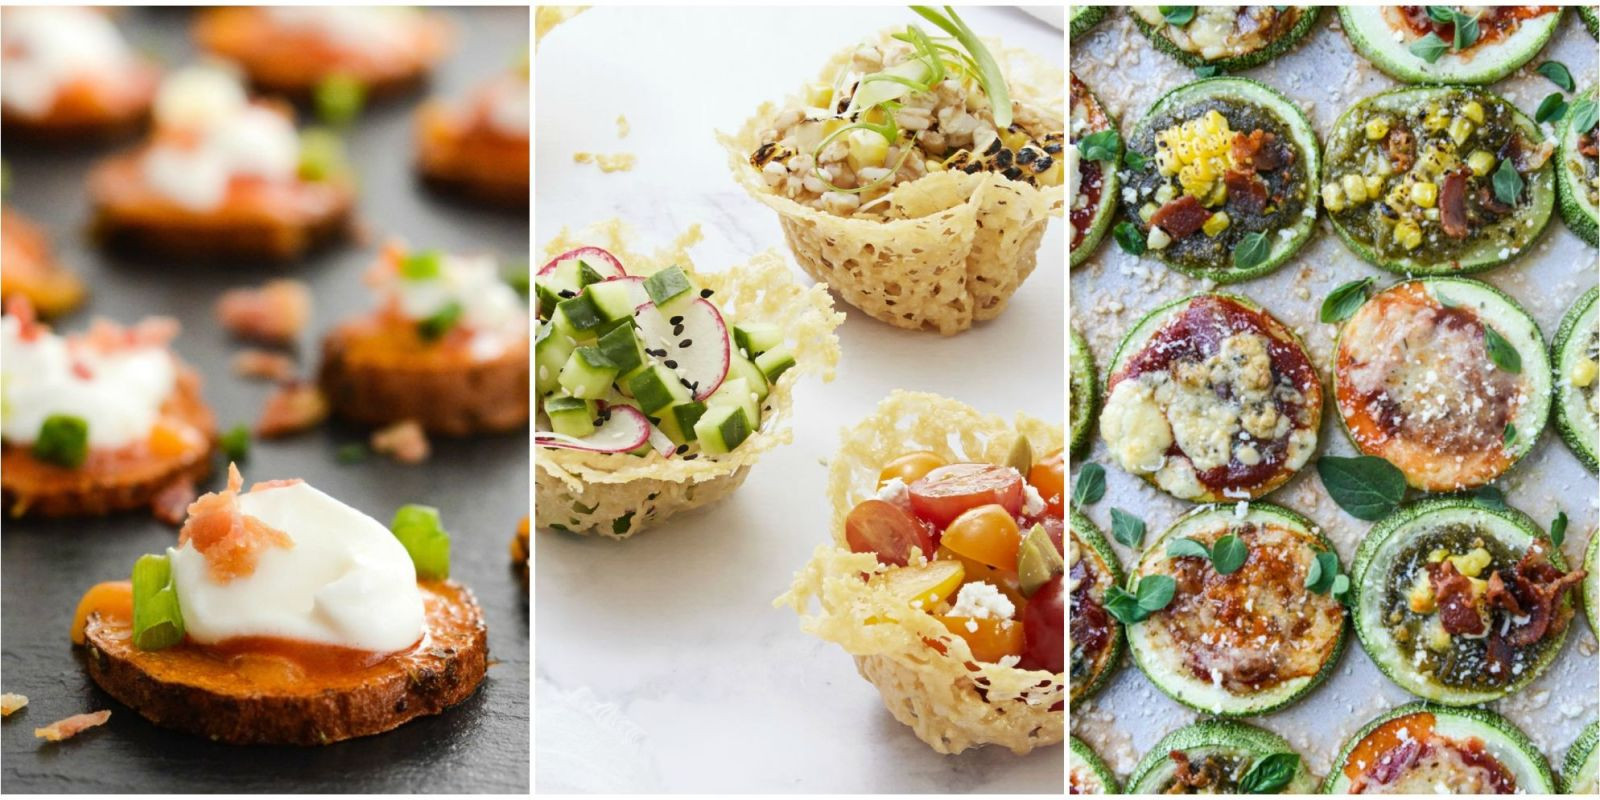 Easy Healthy Party Snacks
 25 Easy Healthy Appetizers Best Recipes for Healthy